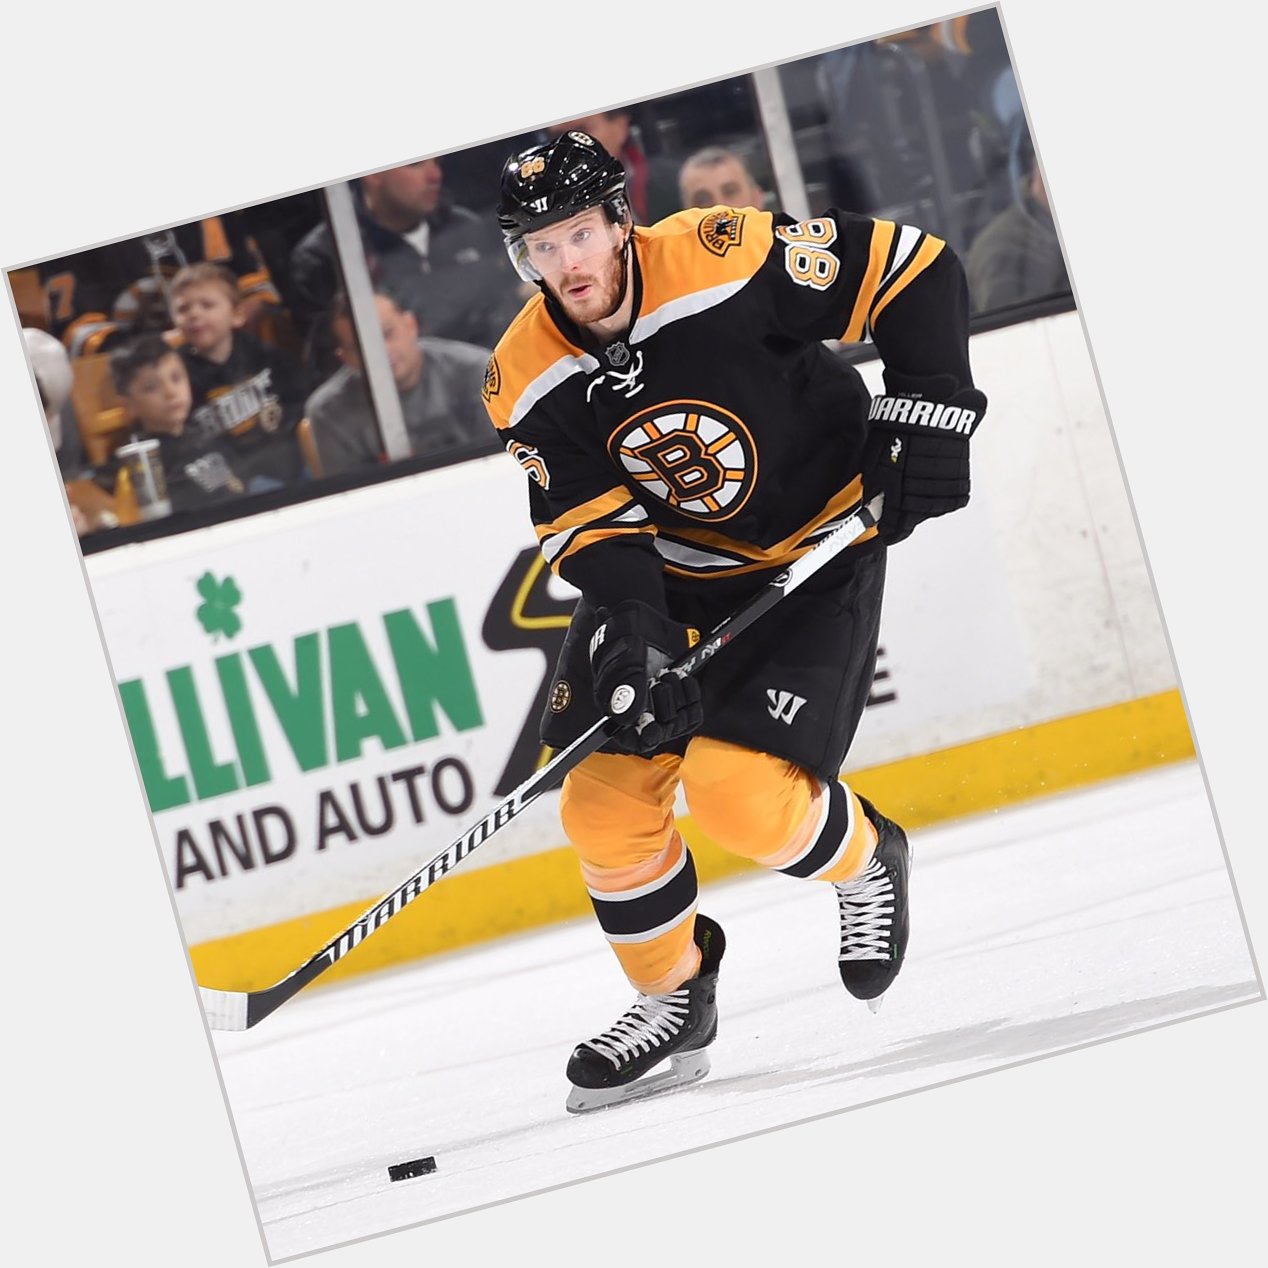  to wish Kevan Miller a happy birthday! 